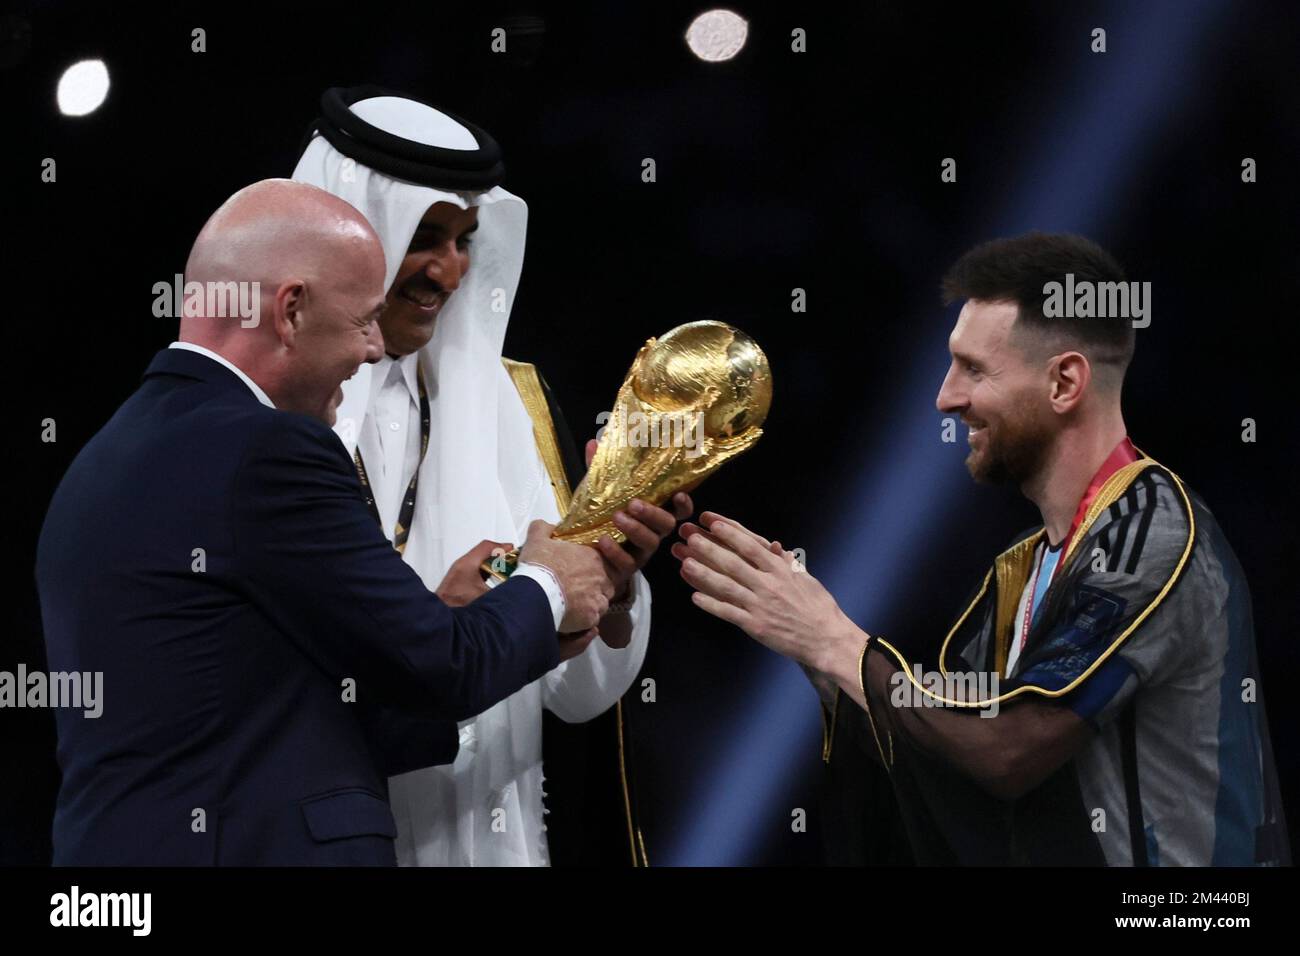 Lusail, Qatar. 18th Dec, 2022. FIFA President Gianni Infantino (L) and The Emir of Qatar Sheikh Tamim bin Hamad Al Thani (C) award Lionel Messi of Argentina during the awarding ceremony of the 2022 FIFA World Cup at Lusail Stadium in Lusail, Qatar, Dec. 18, 2022. Credit: Lan Hongguang/Xinhua/Alamy Live News/Alamy Live News Stock Photo